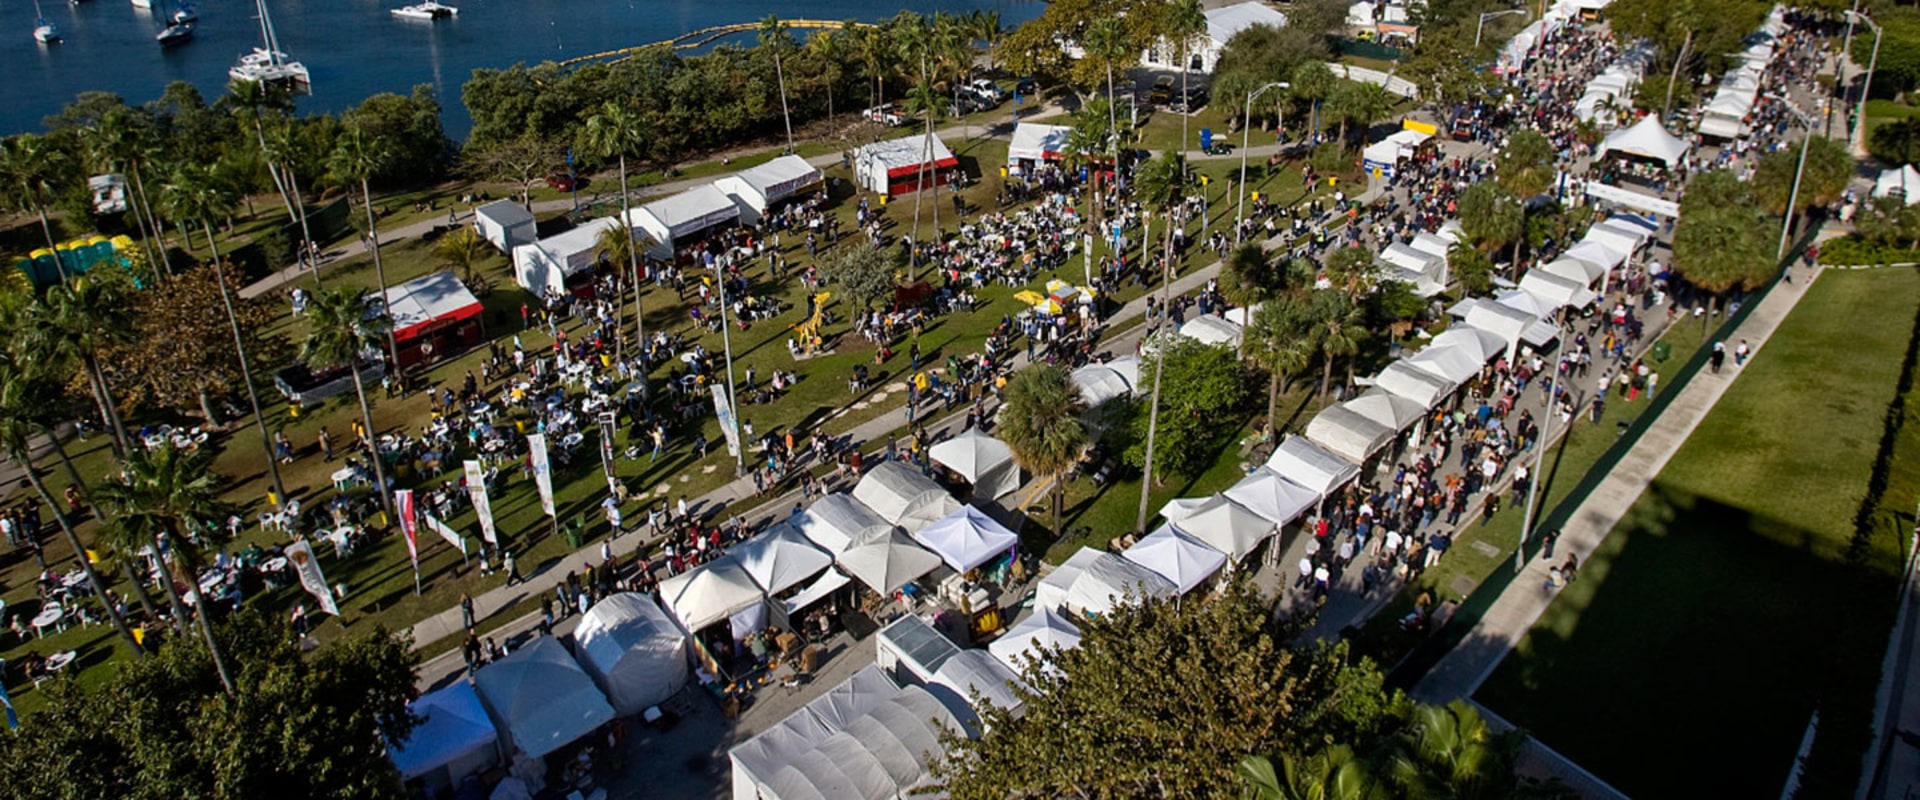 Experience the Coconut Grove Art Festival This Presidents' Day Weekend